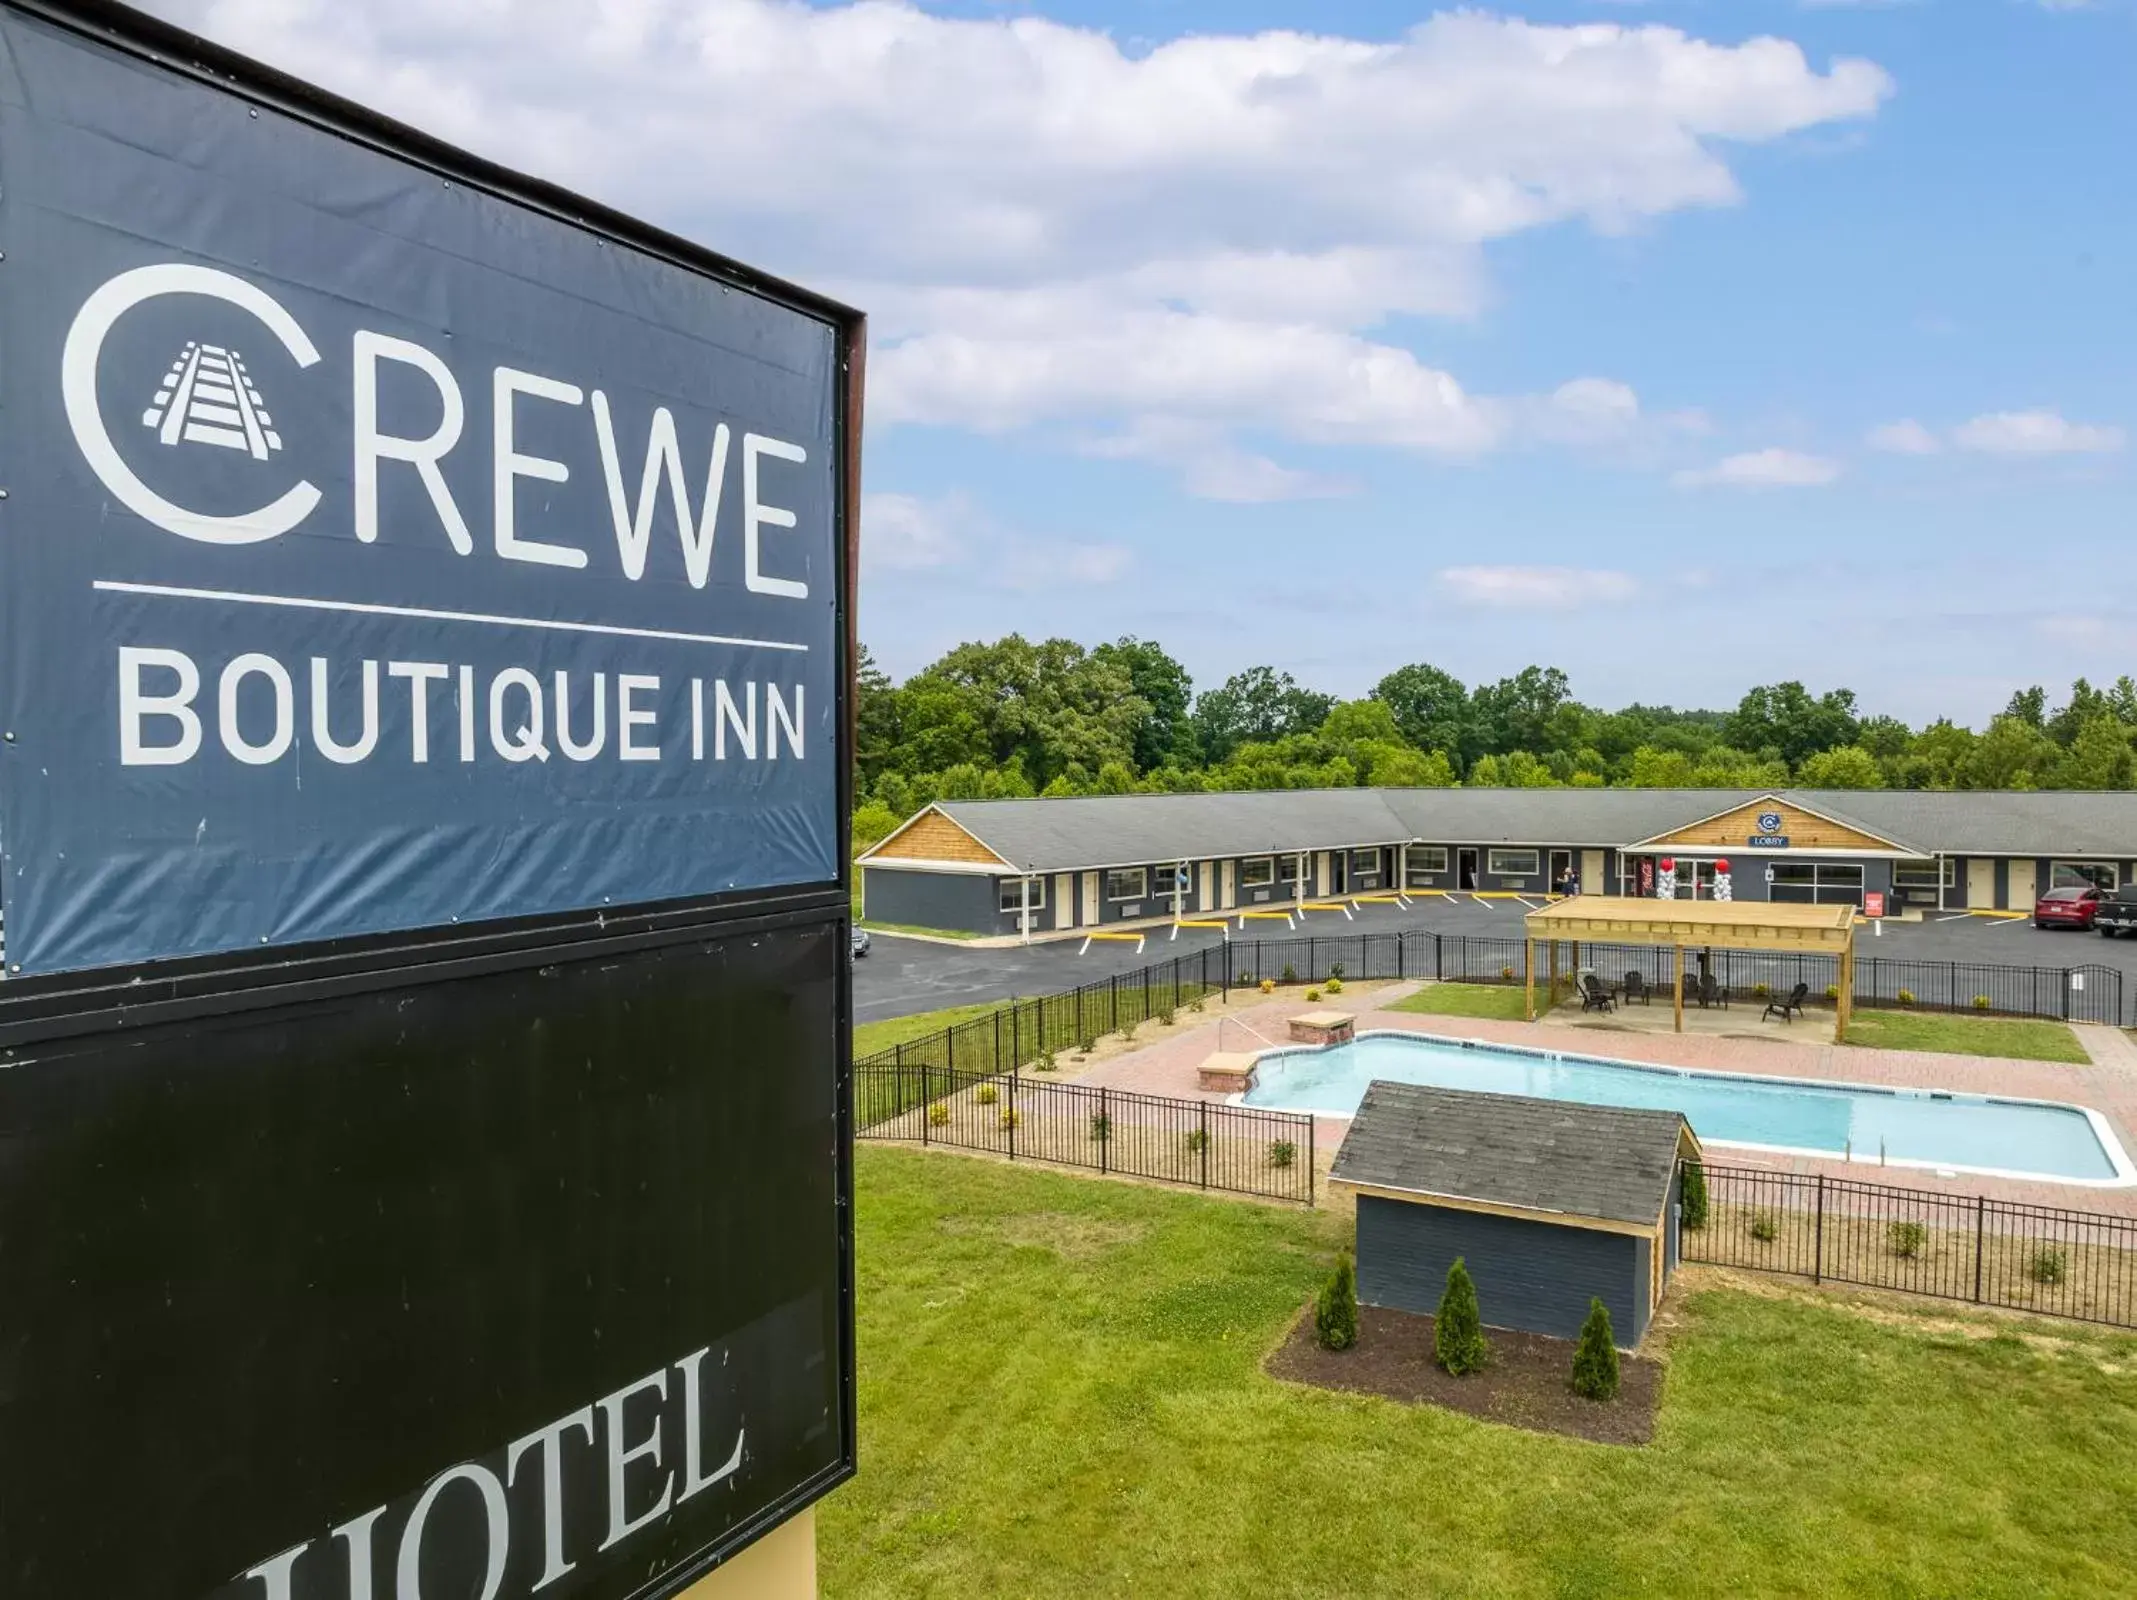 Property building, Pool View in Crewe Boutique Inn